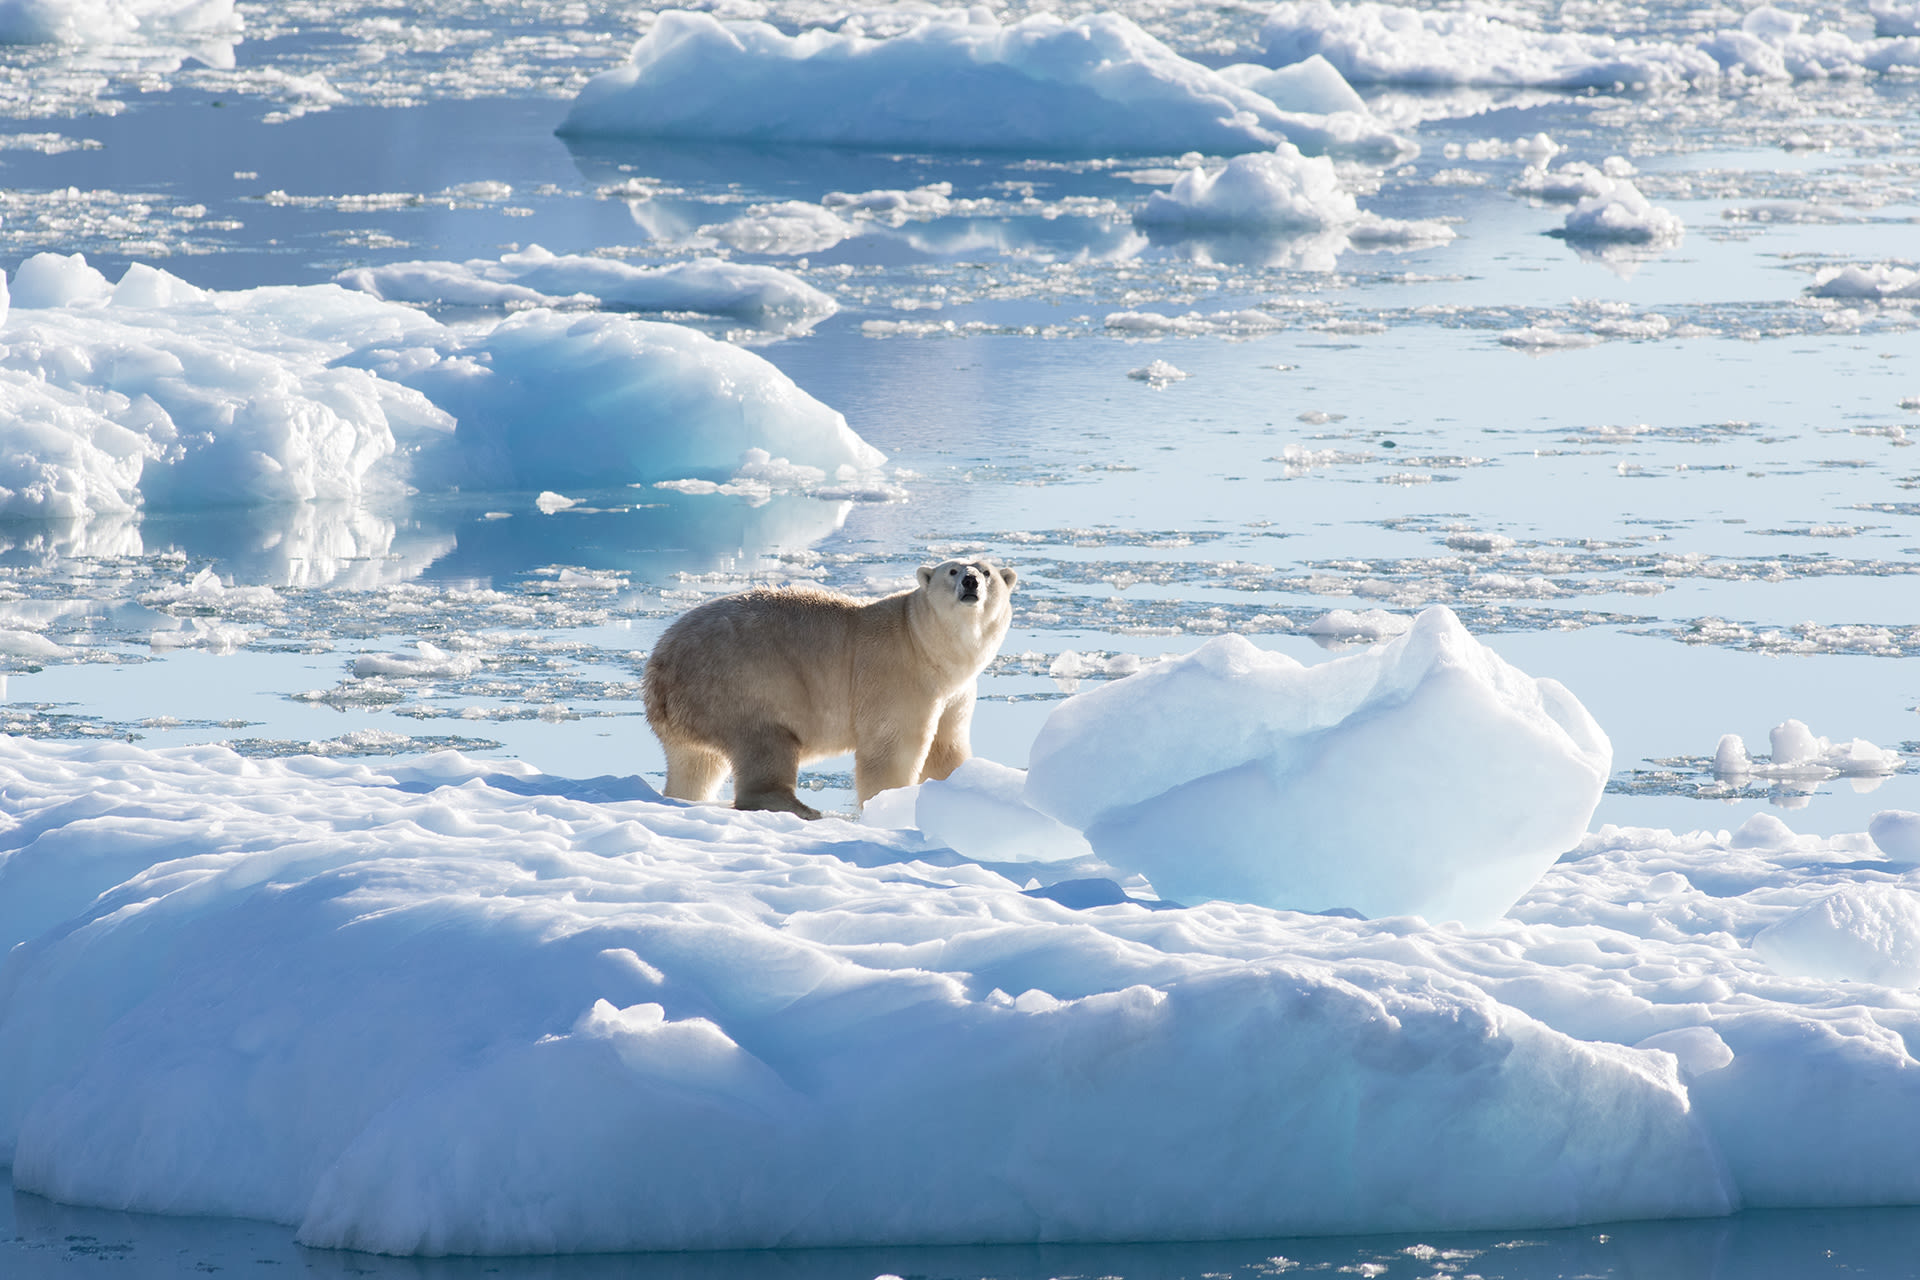 New subpopulation of polar bears discovered in remote part of Greenland